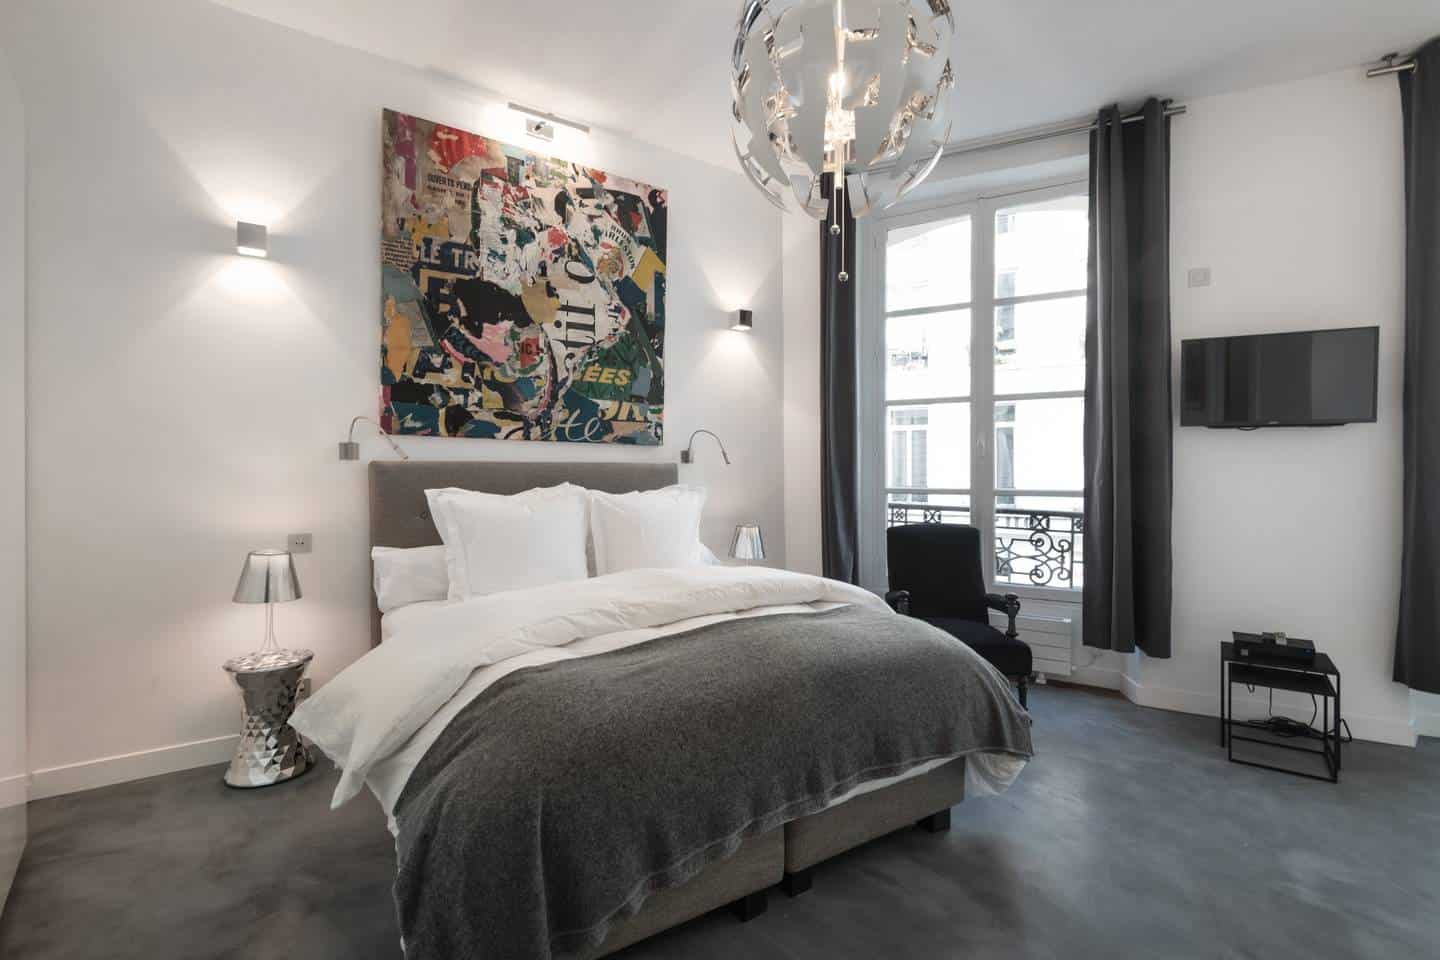 Wow! This Airbnb Paris listing near Marais is dreamy. You have to see the pictures!